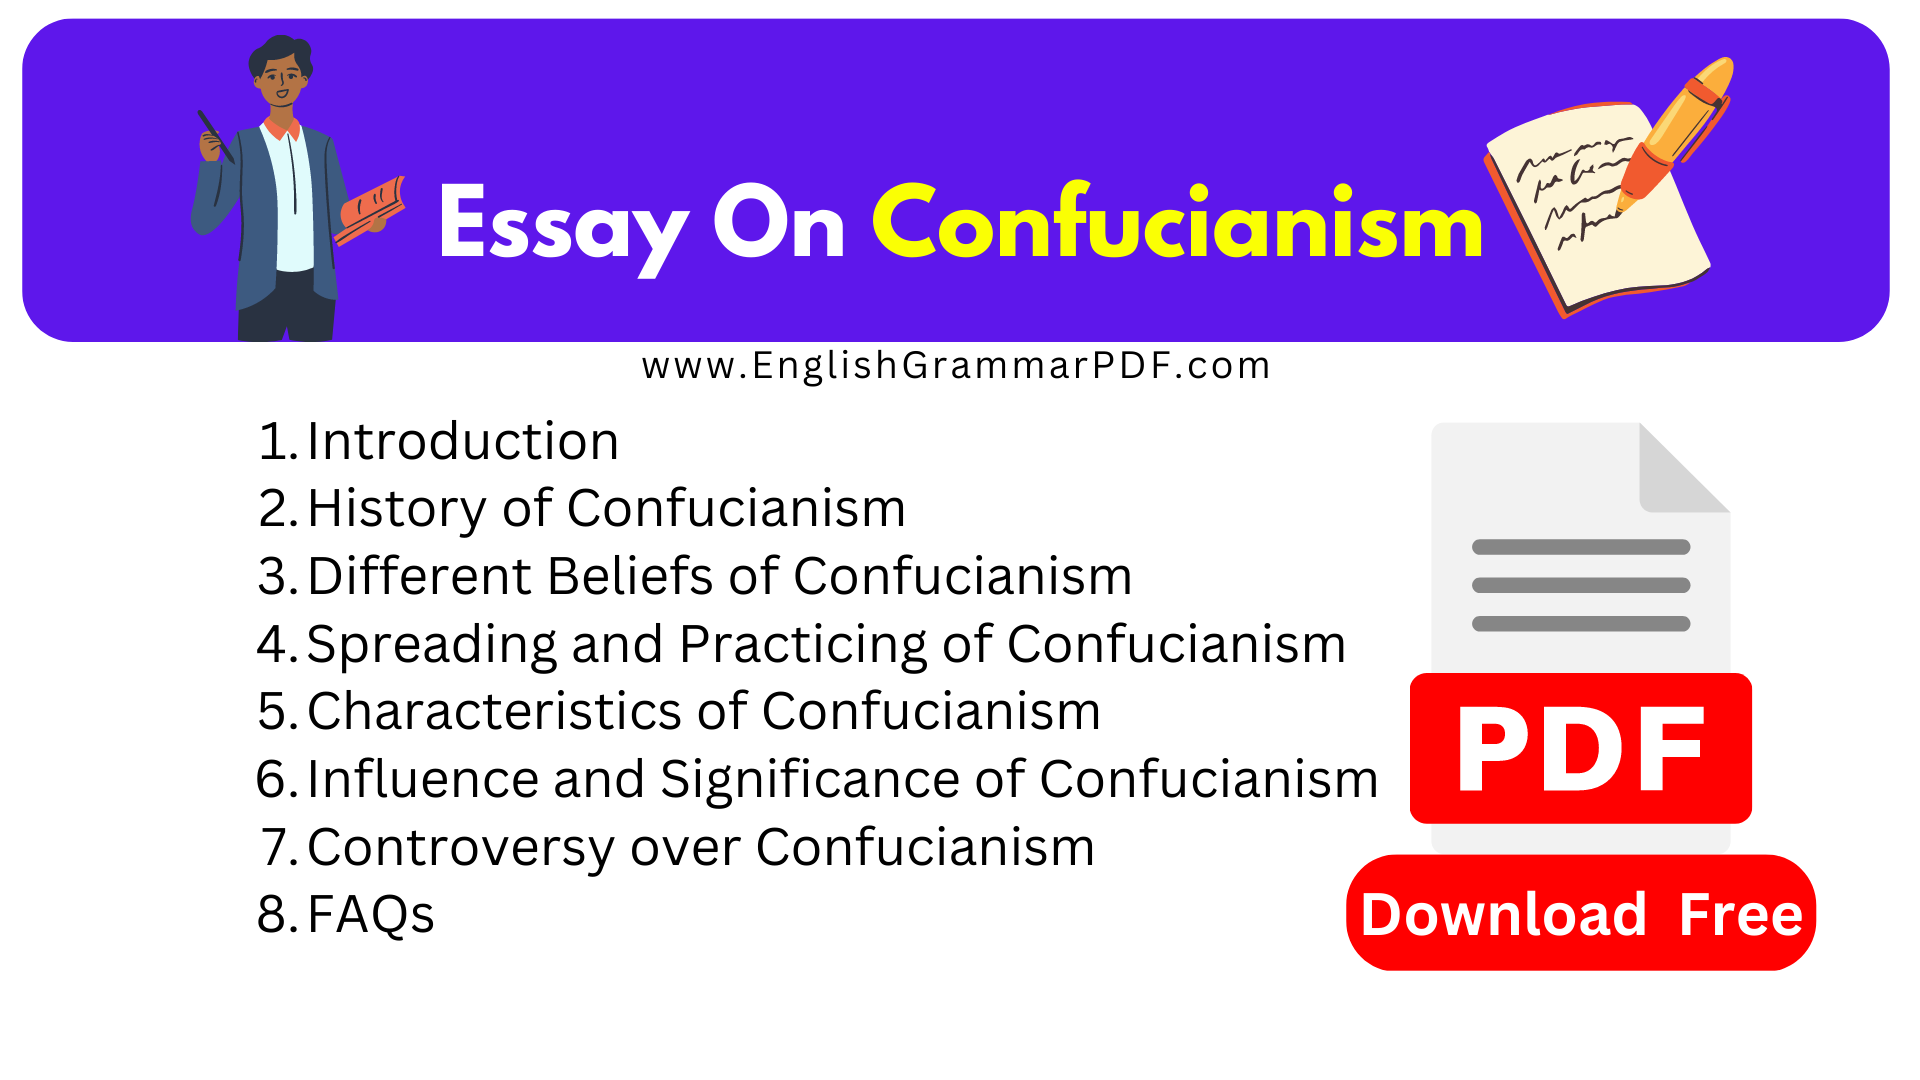 Essay On Confucianism